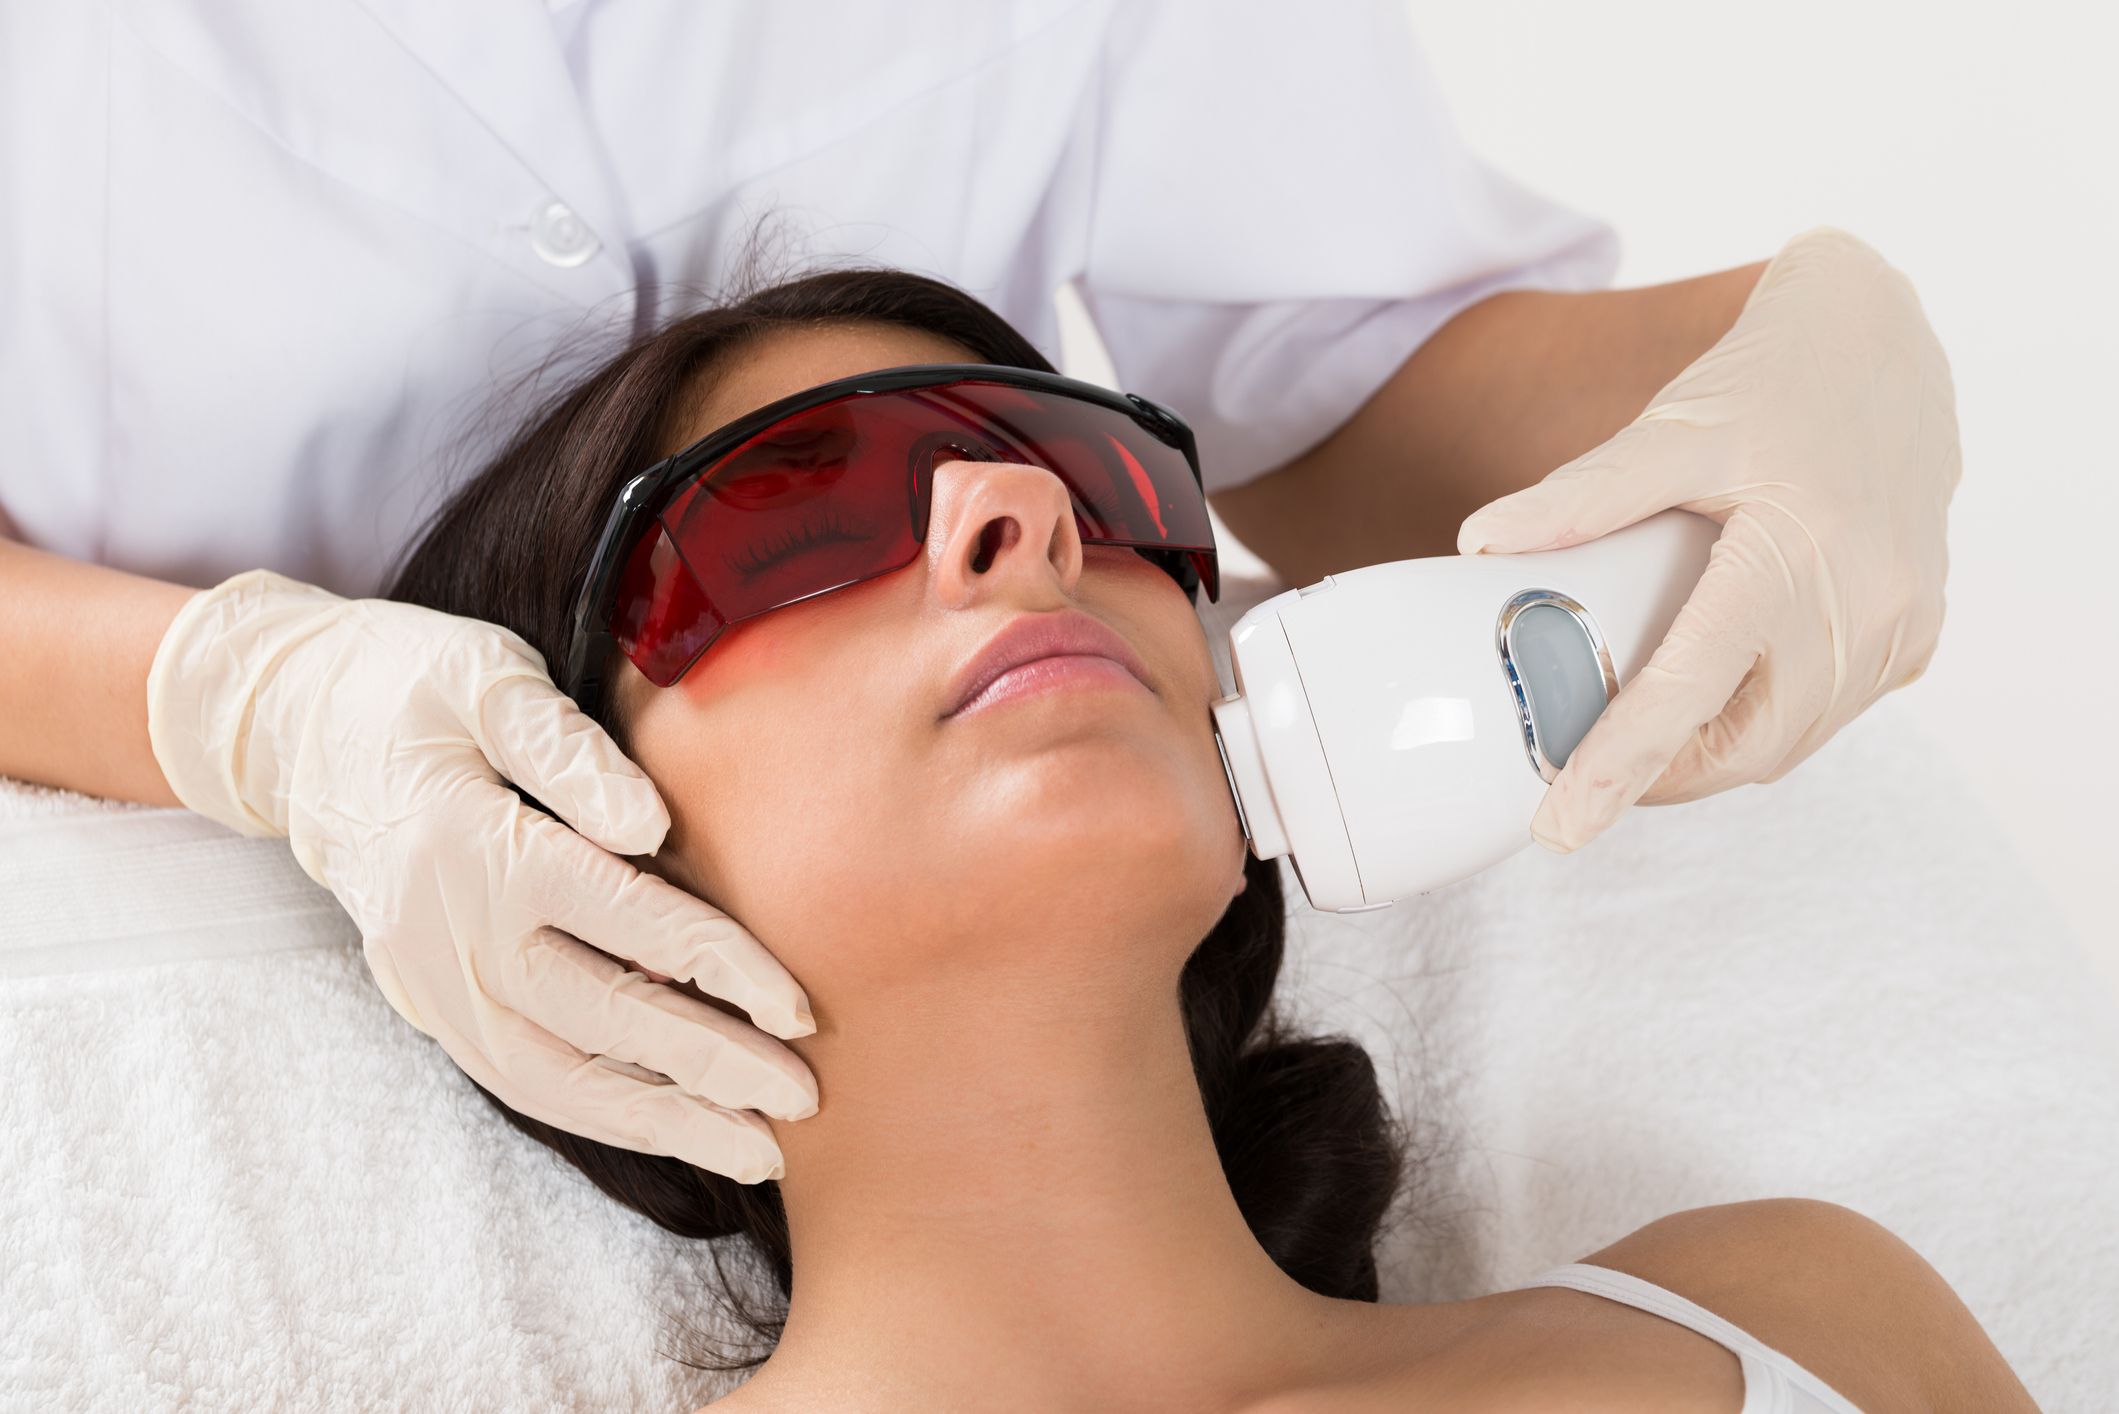 Laser hair removal: benefits and risks